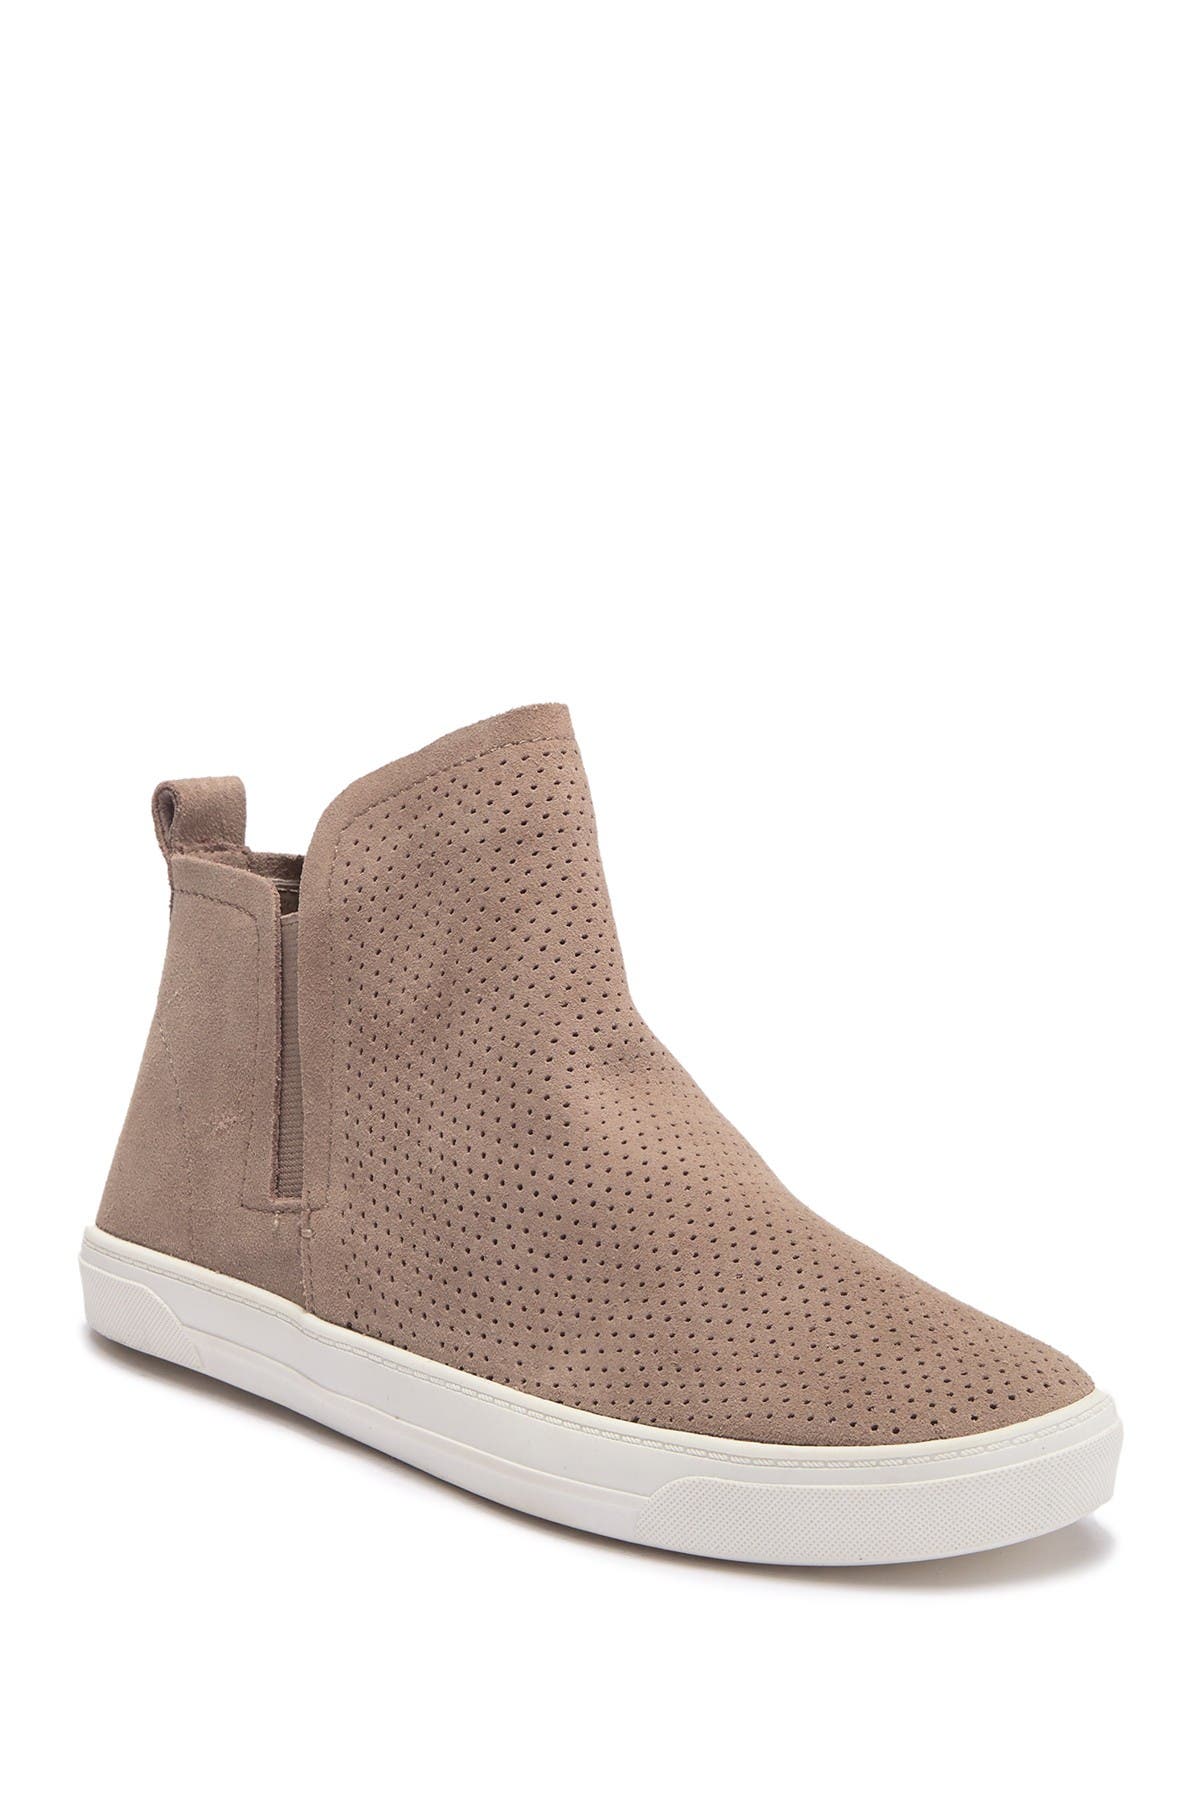 Dolce Vita | Xane Perforated Suede 